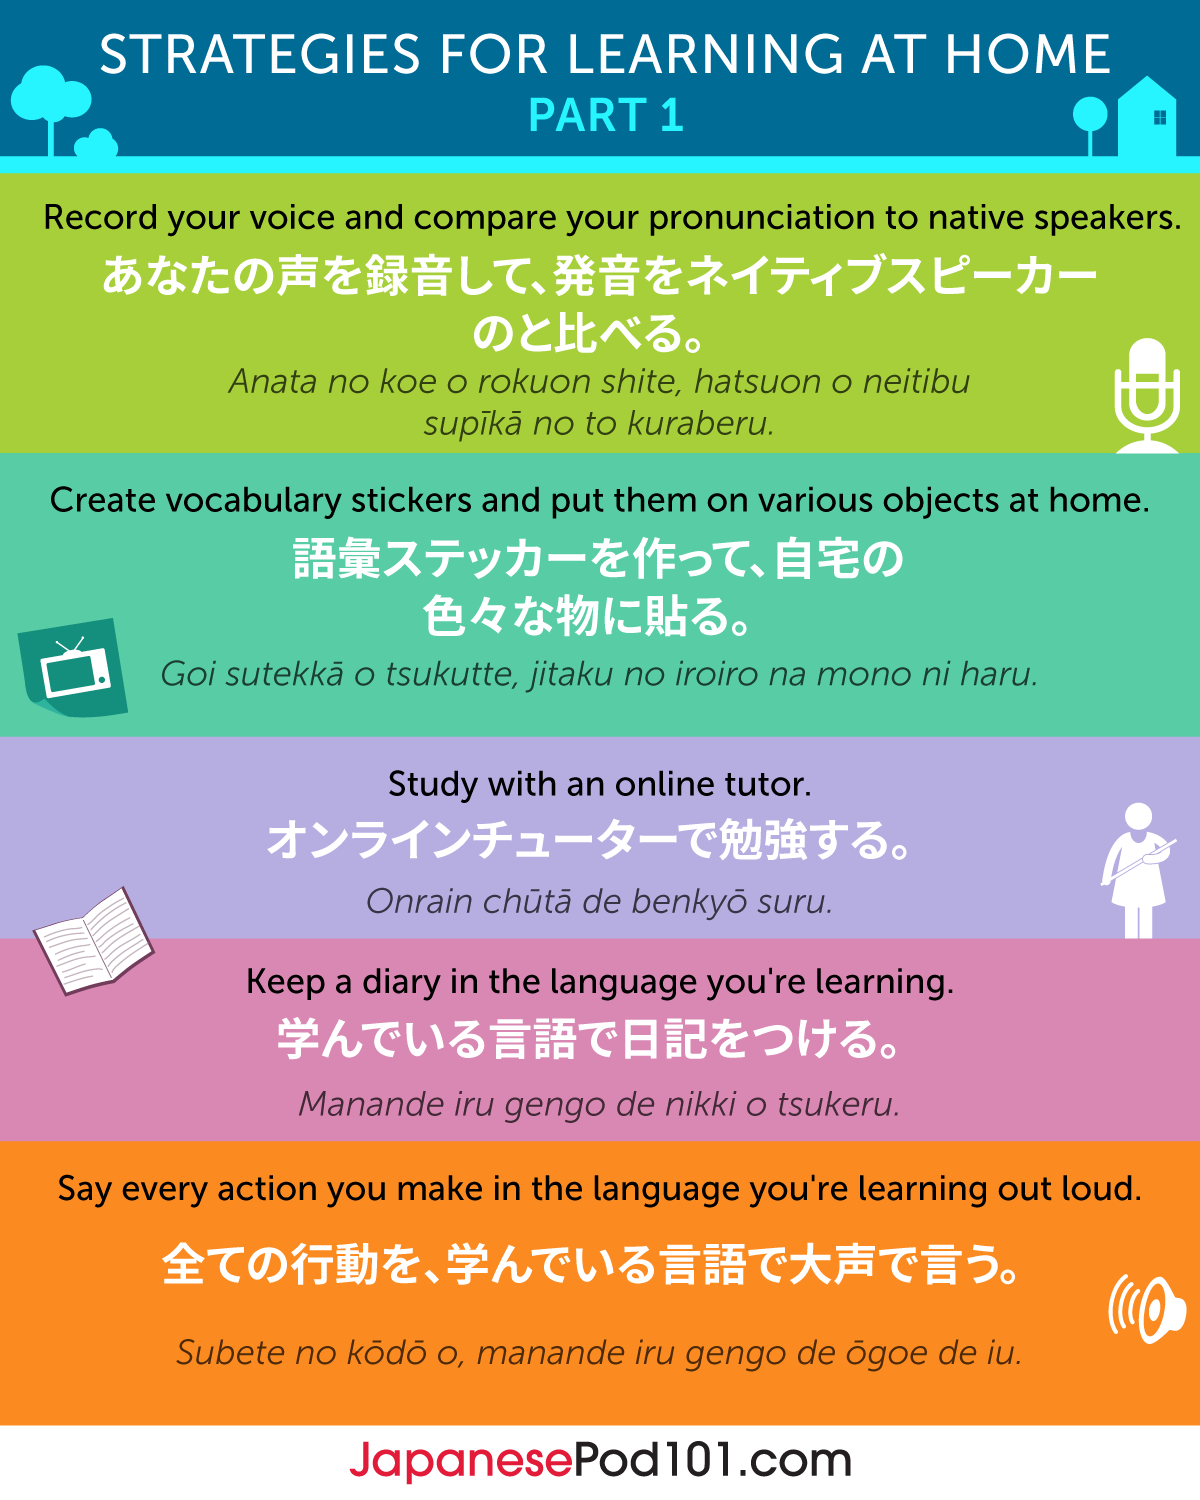 Learn Japanese - JapanesePod101.com on X: 𝓗𝓐𝓟𝓟𝓨 Words in Japanese! 🥳  Don't forget to click the link in our Bio @japanesepod101 to learn more  Japanese! 🥰 Plus, learn the 110 most basic